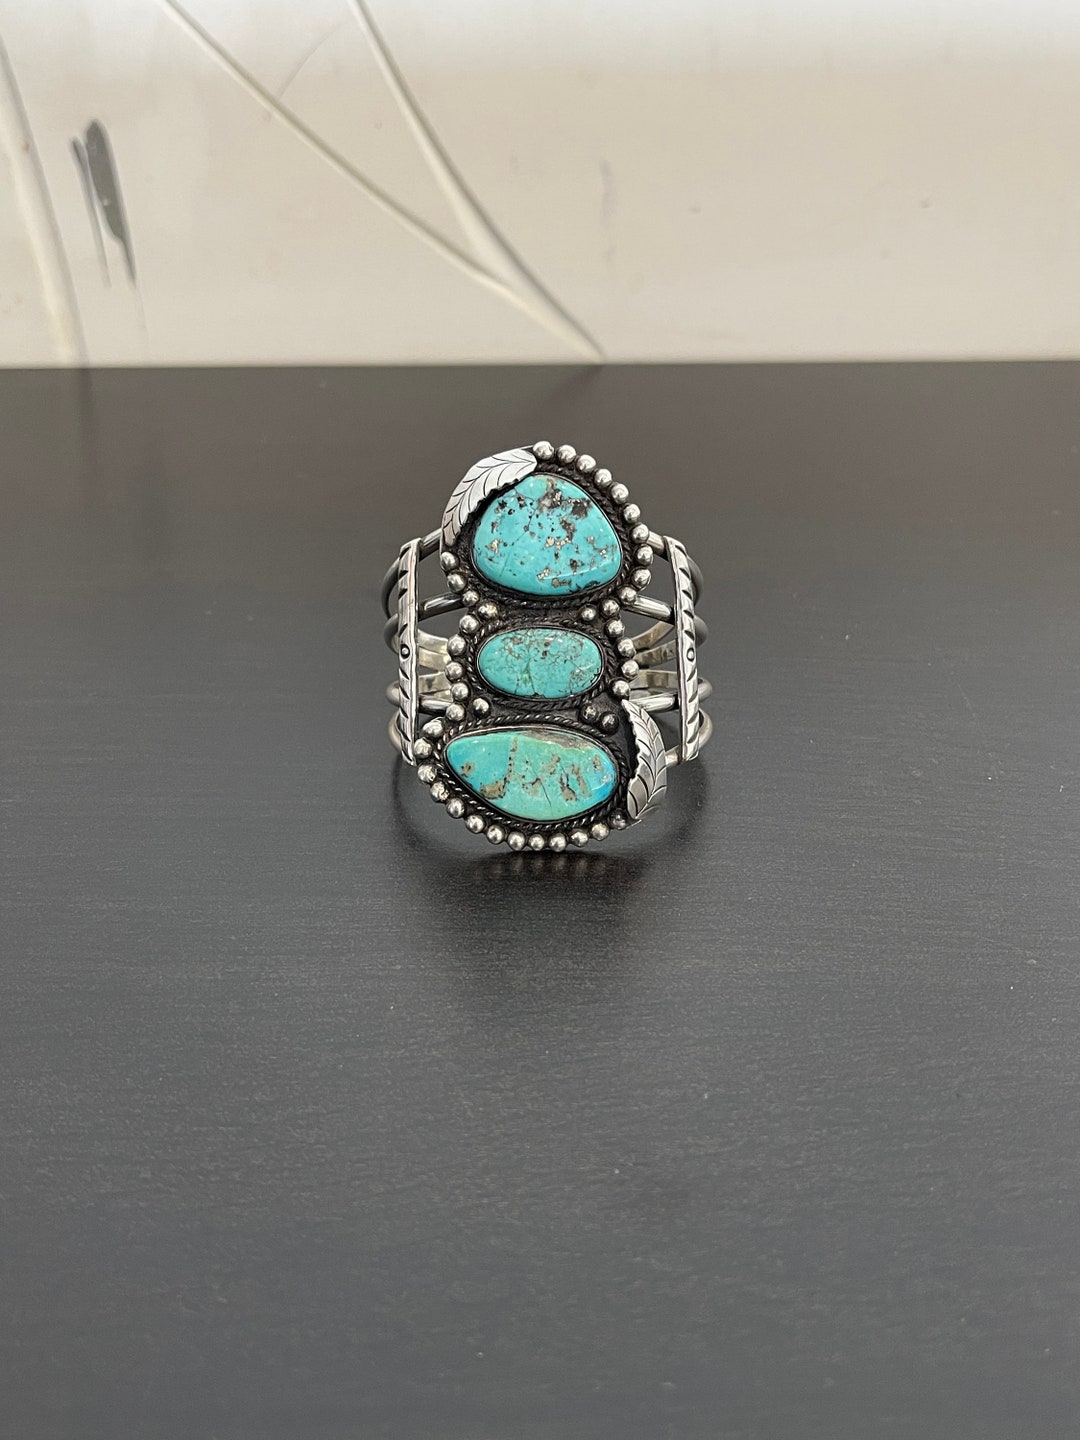 GORGEOUS Arizona Turquoise Navajo Cuff Bracelet in Sterling - Etsy